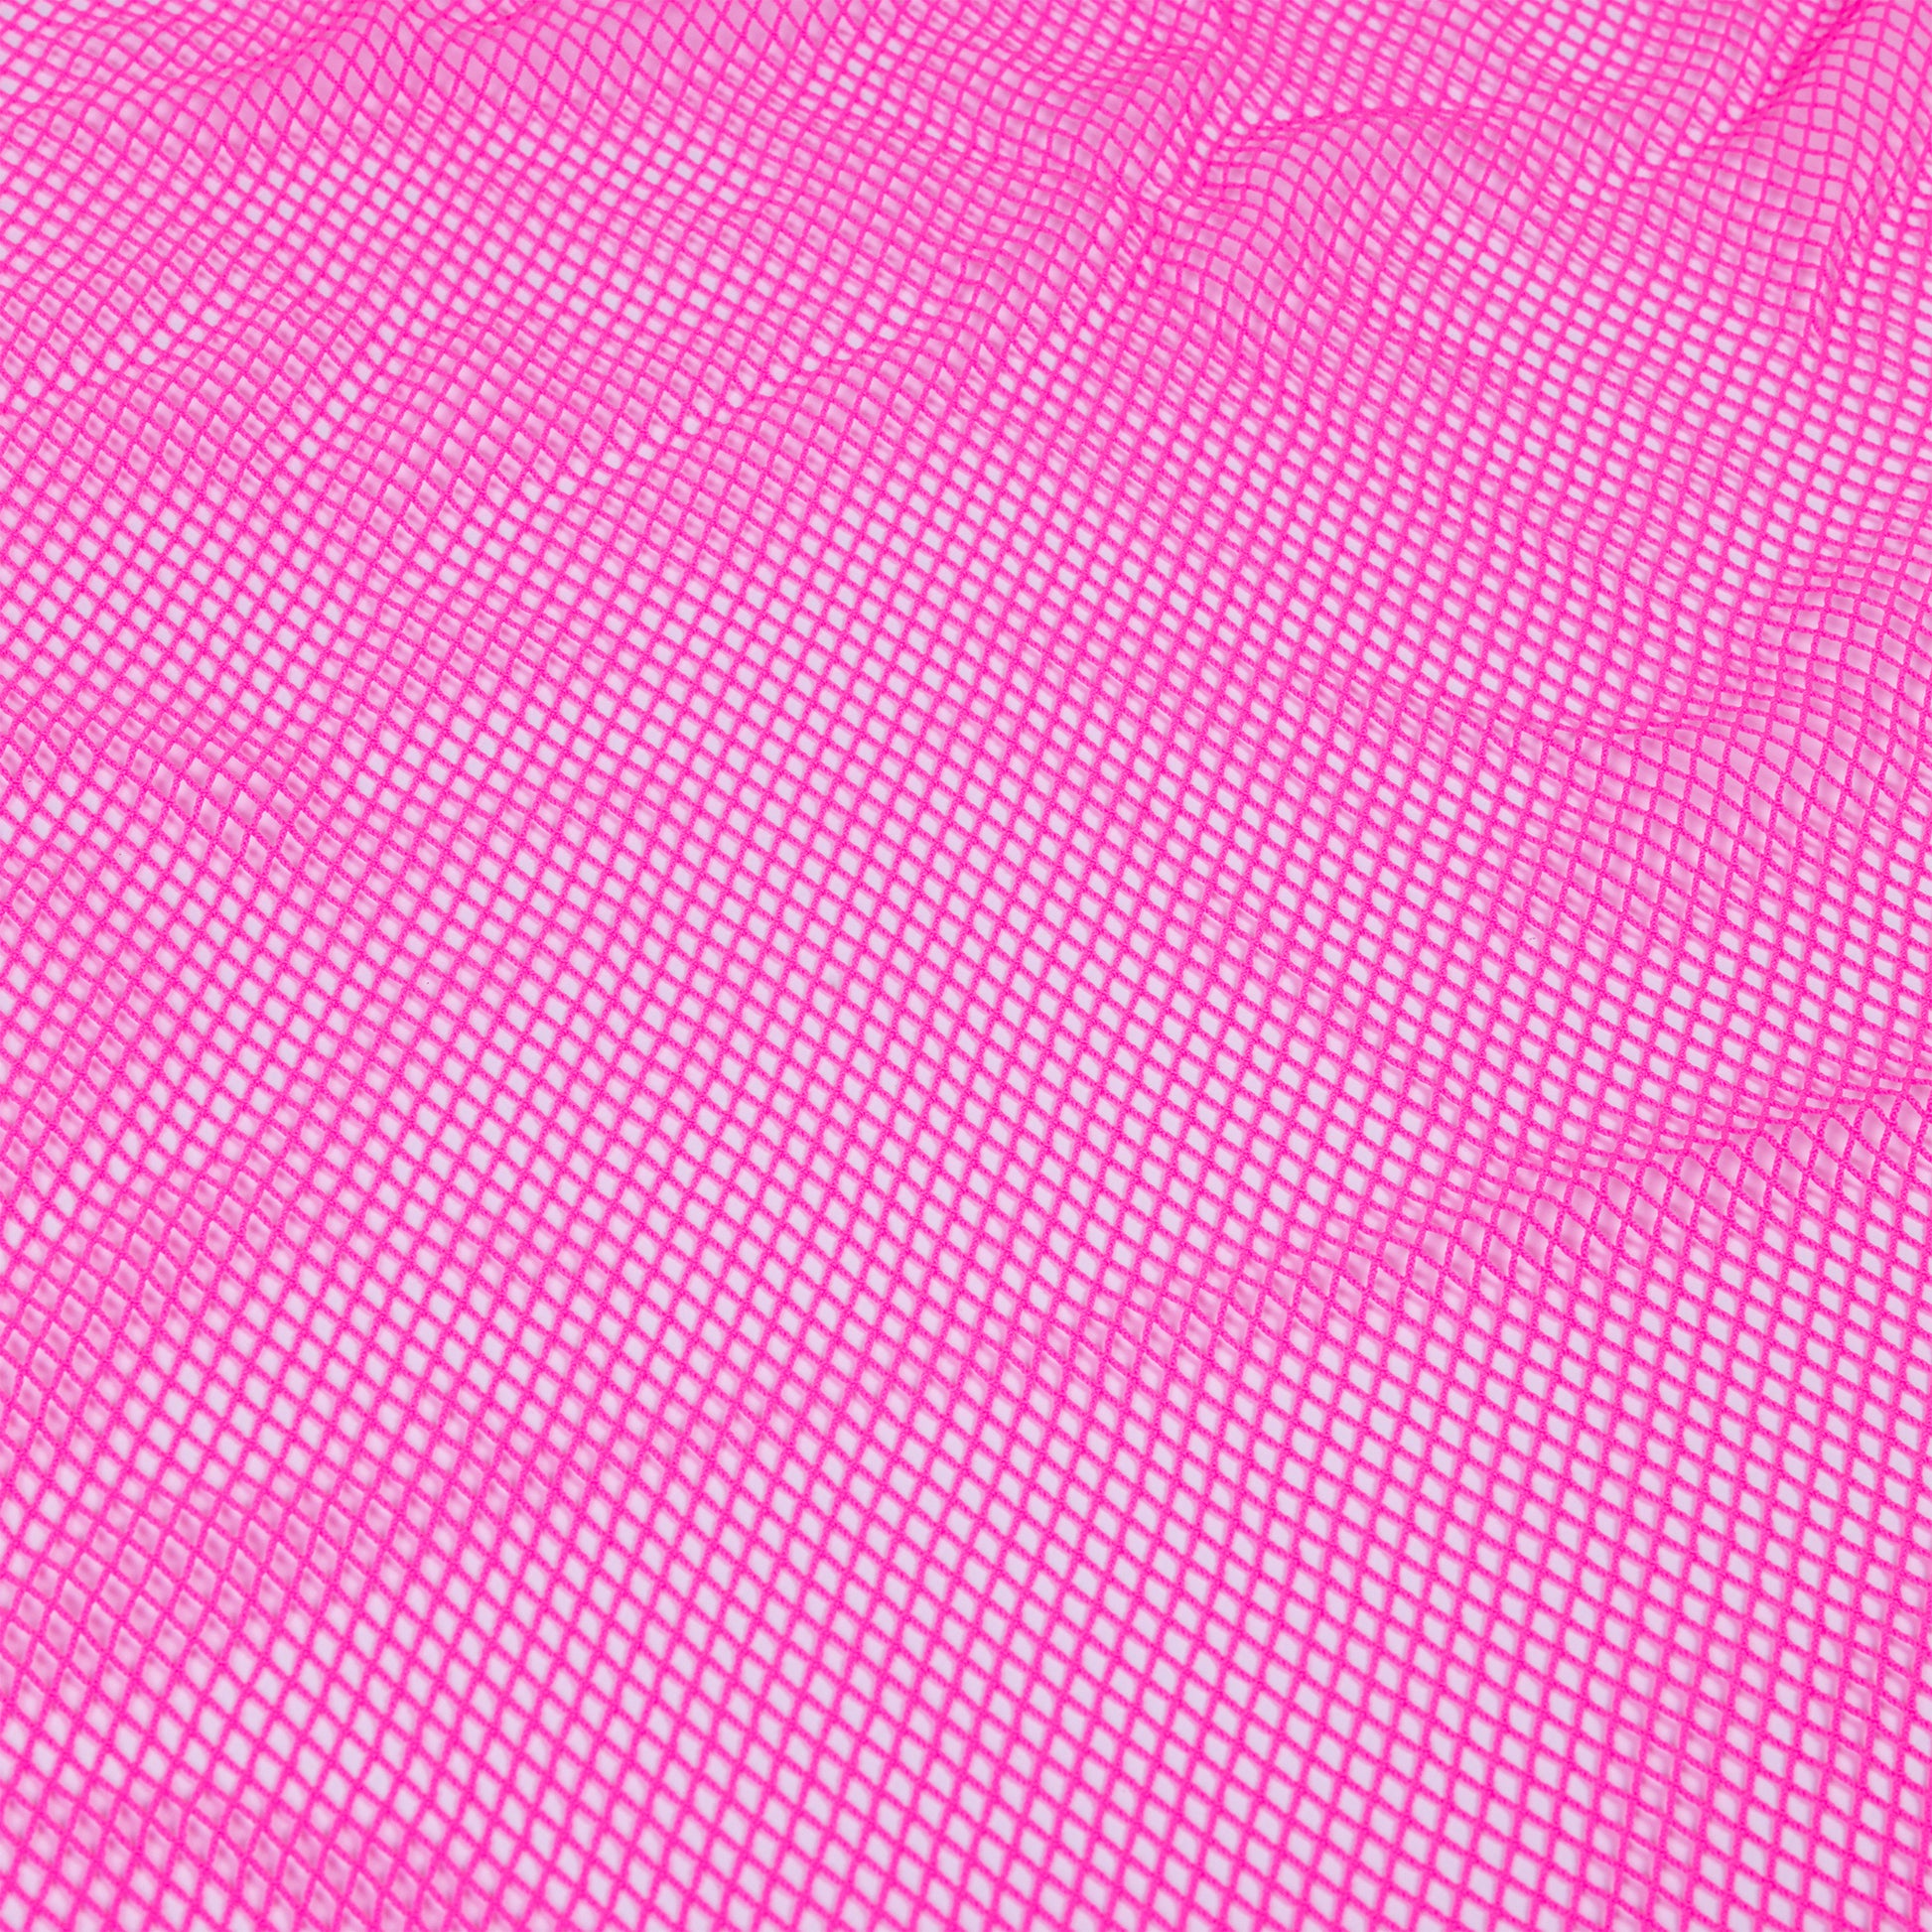 A bright pink Barbie 90's fishnet fabric for fun crafting and making costumes